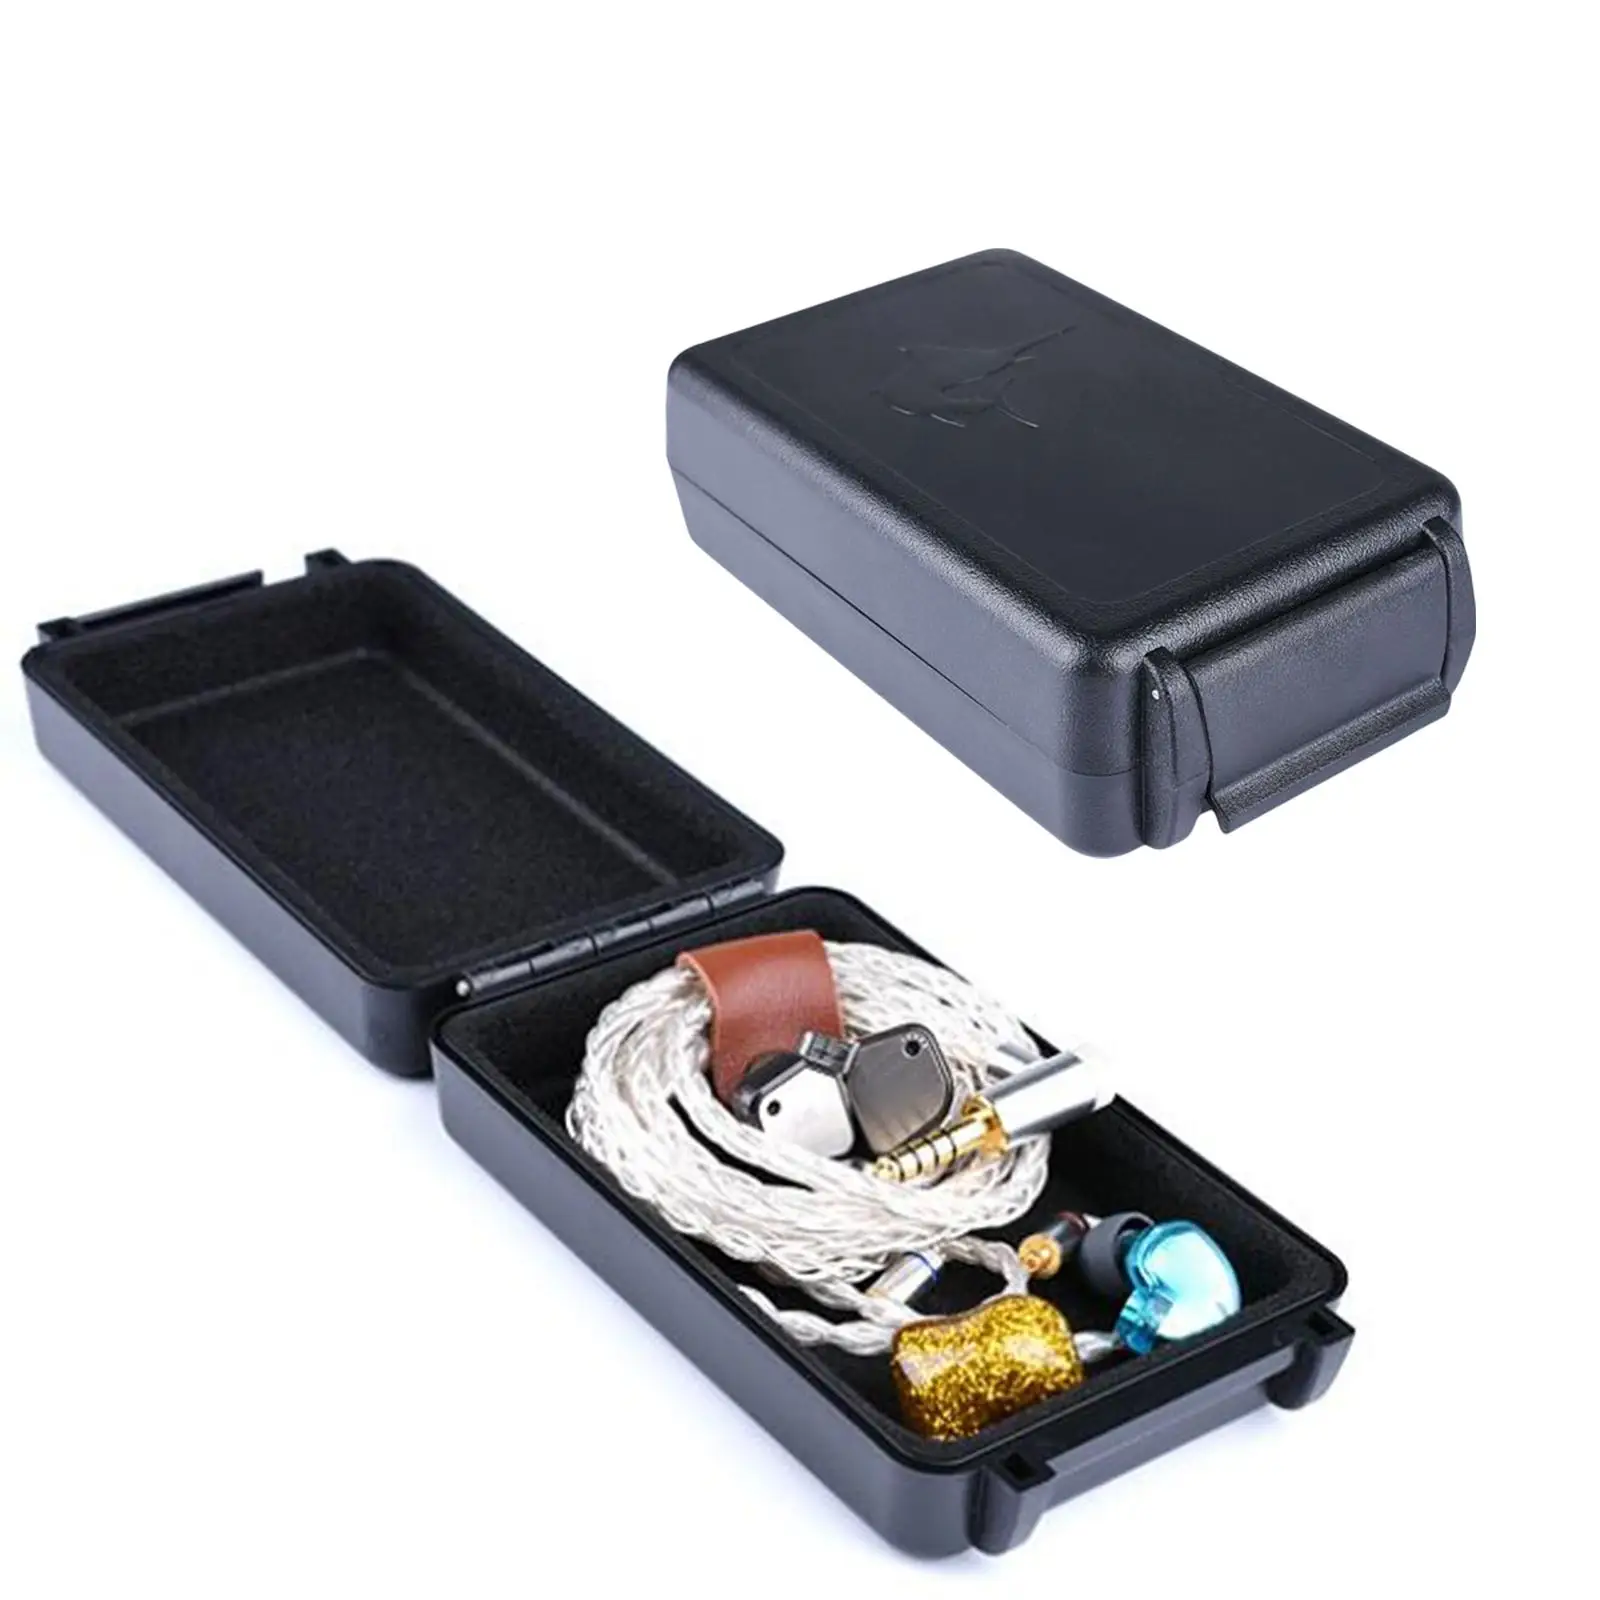 Protective Storage Case carry bags Headset Pouch Travel Electronics Organizer Travel Cable Organizer Bag for Earphone Wire Phone